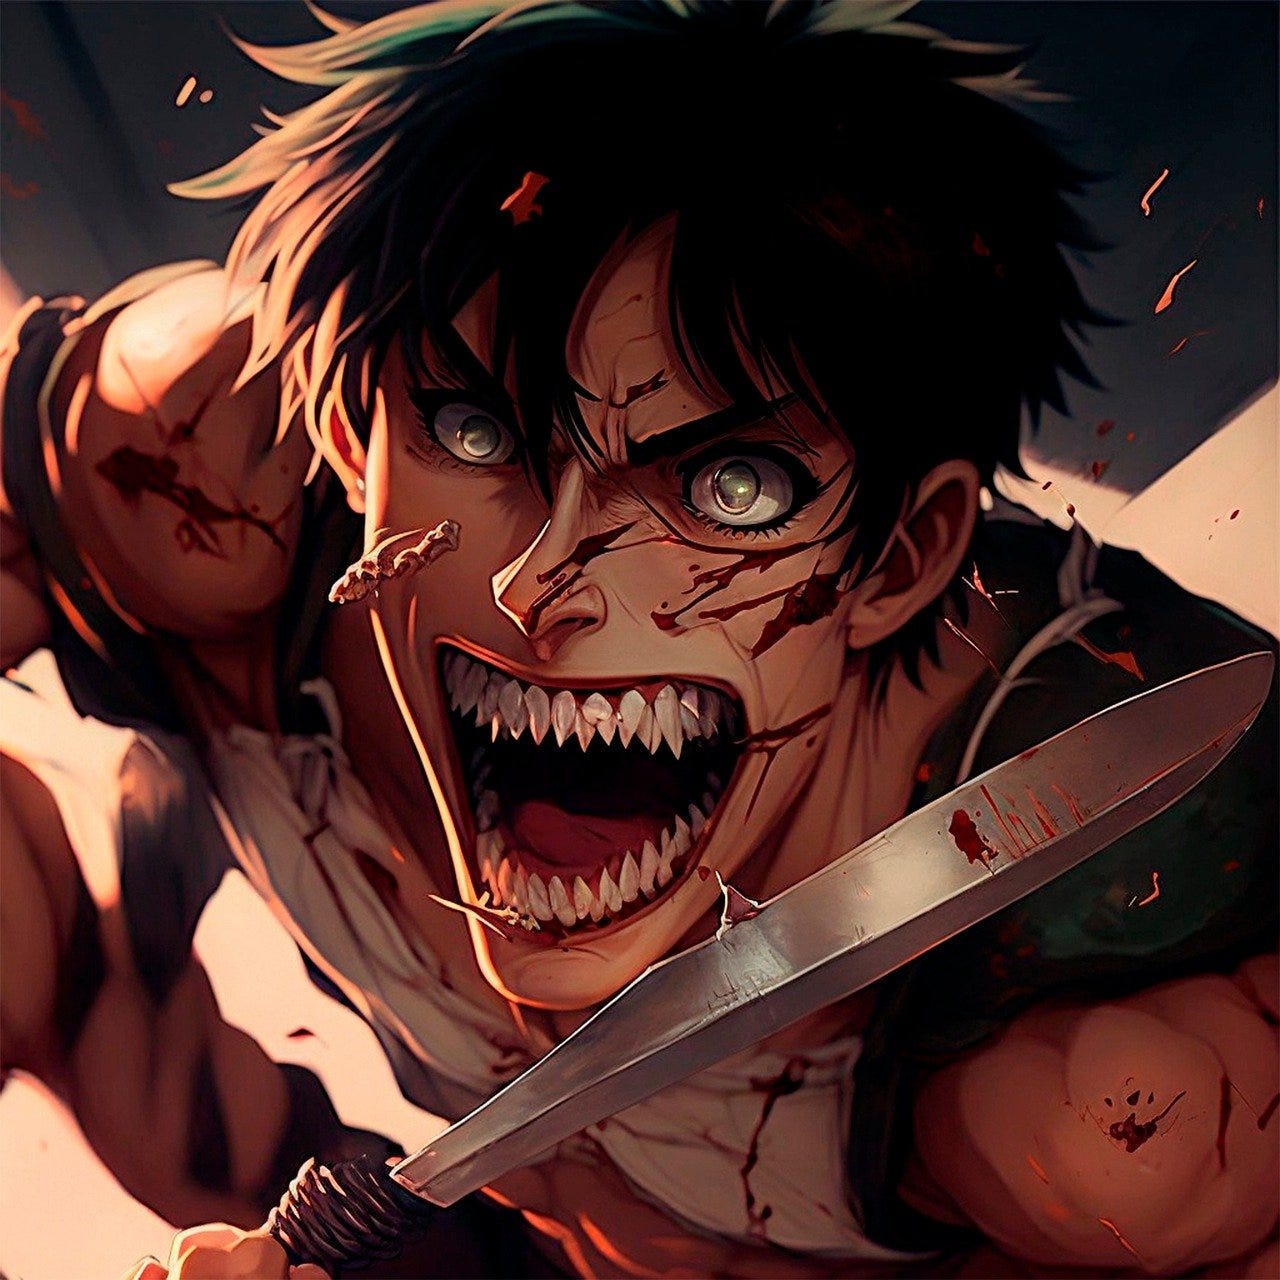 Attack on Titan The Final Season Part 4 gets a new trailer